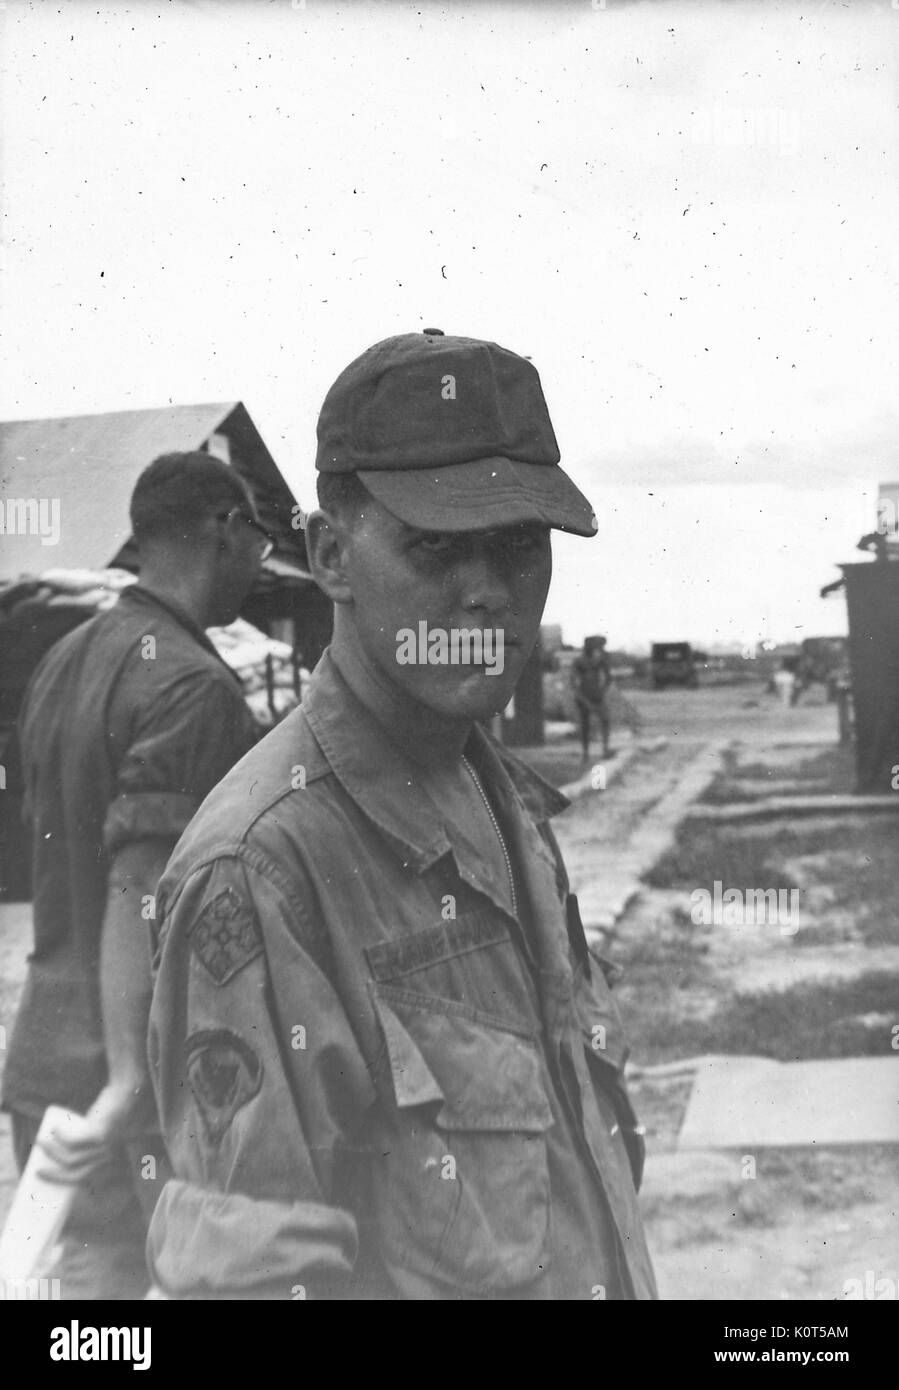 A soldier putting on a serious face while posing in his uniform, other soldiers can be seen in the background on the military base, Vietnam, 1967. Stock Photo